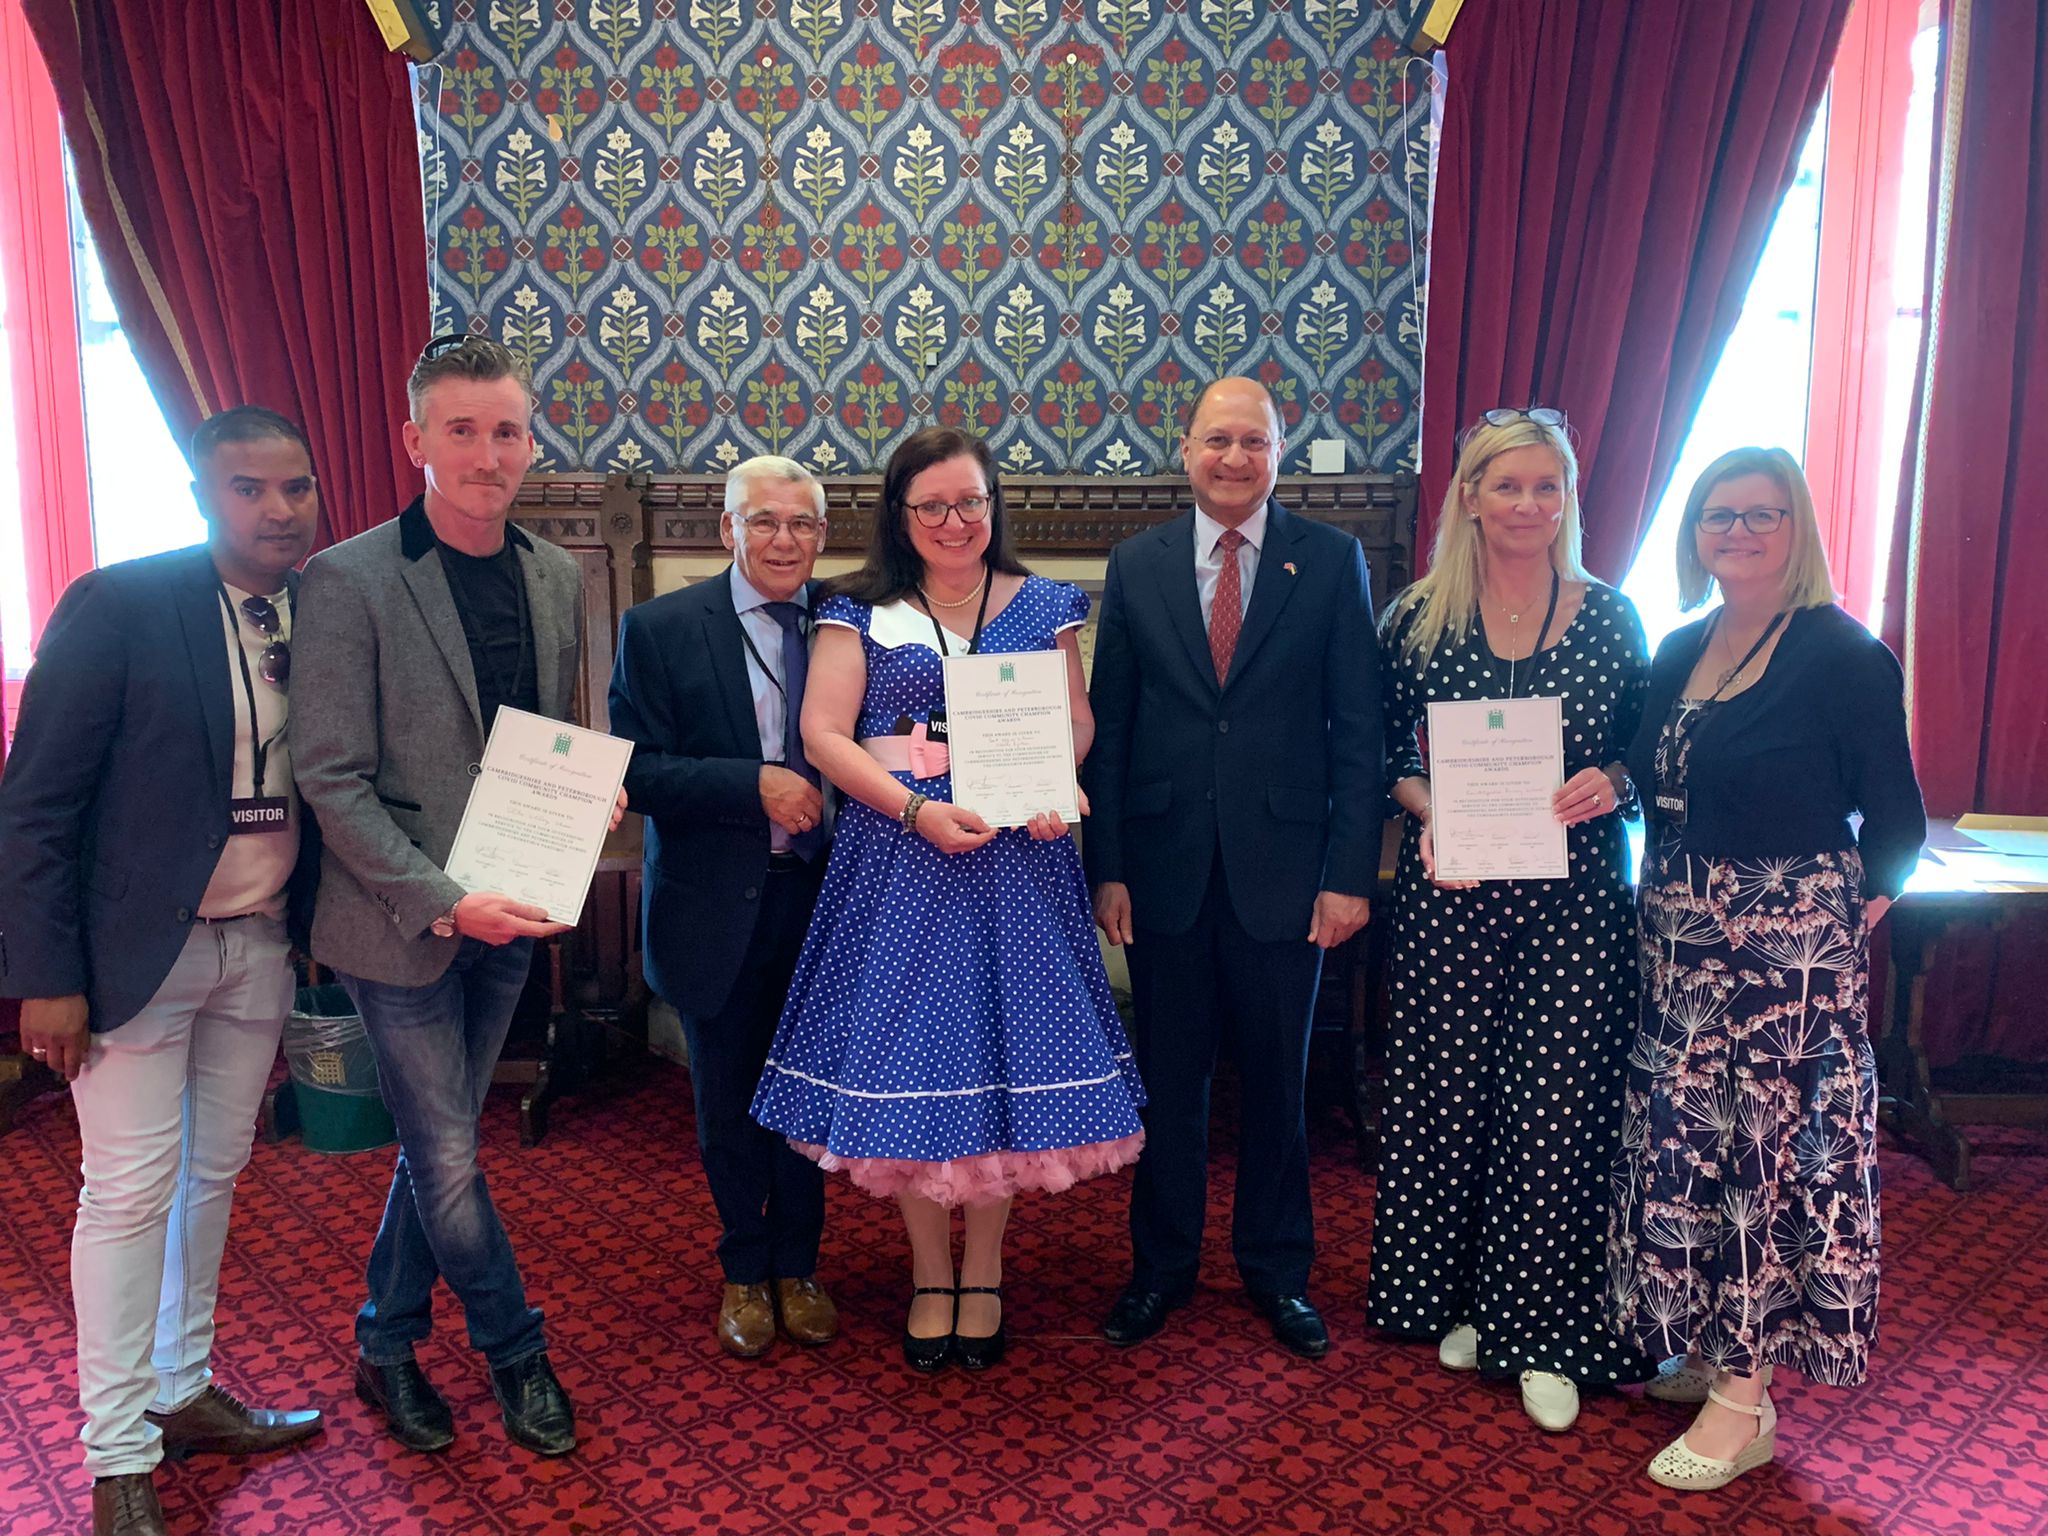 Shailesh Vara MP on X: Very pleased to welcome Coronavirus Community  Champions from my constituency to receive awards in Parliament. Huge thanks  to @SouthfieldsInfo, Elton Village Stores and Post Office Stores in